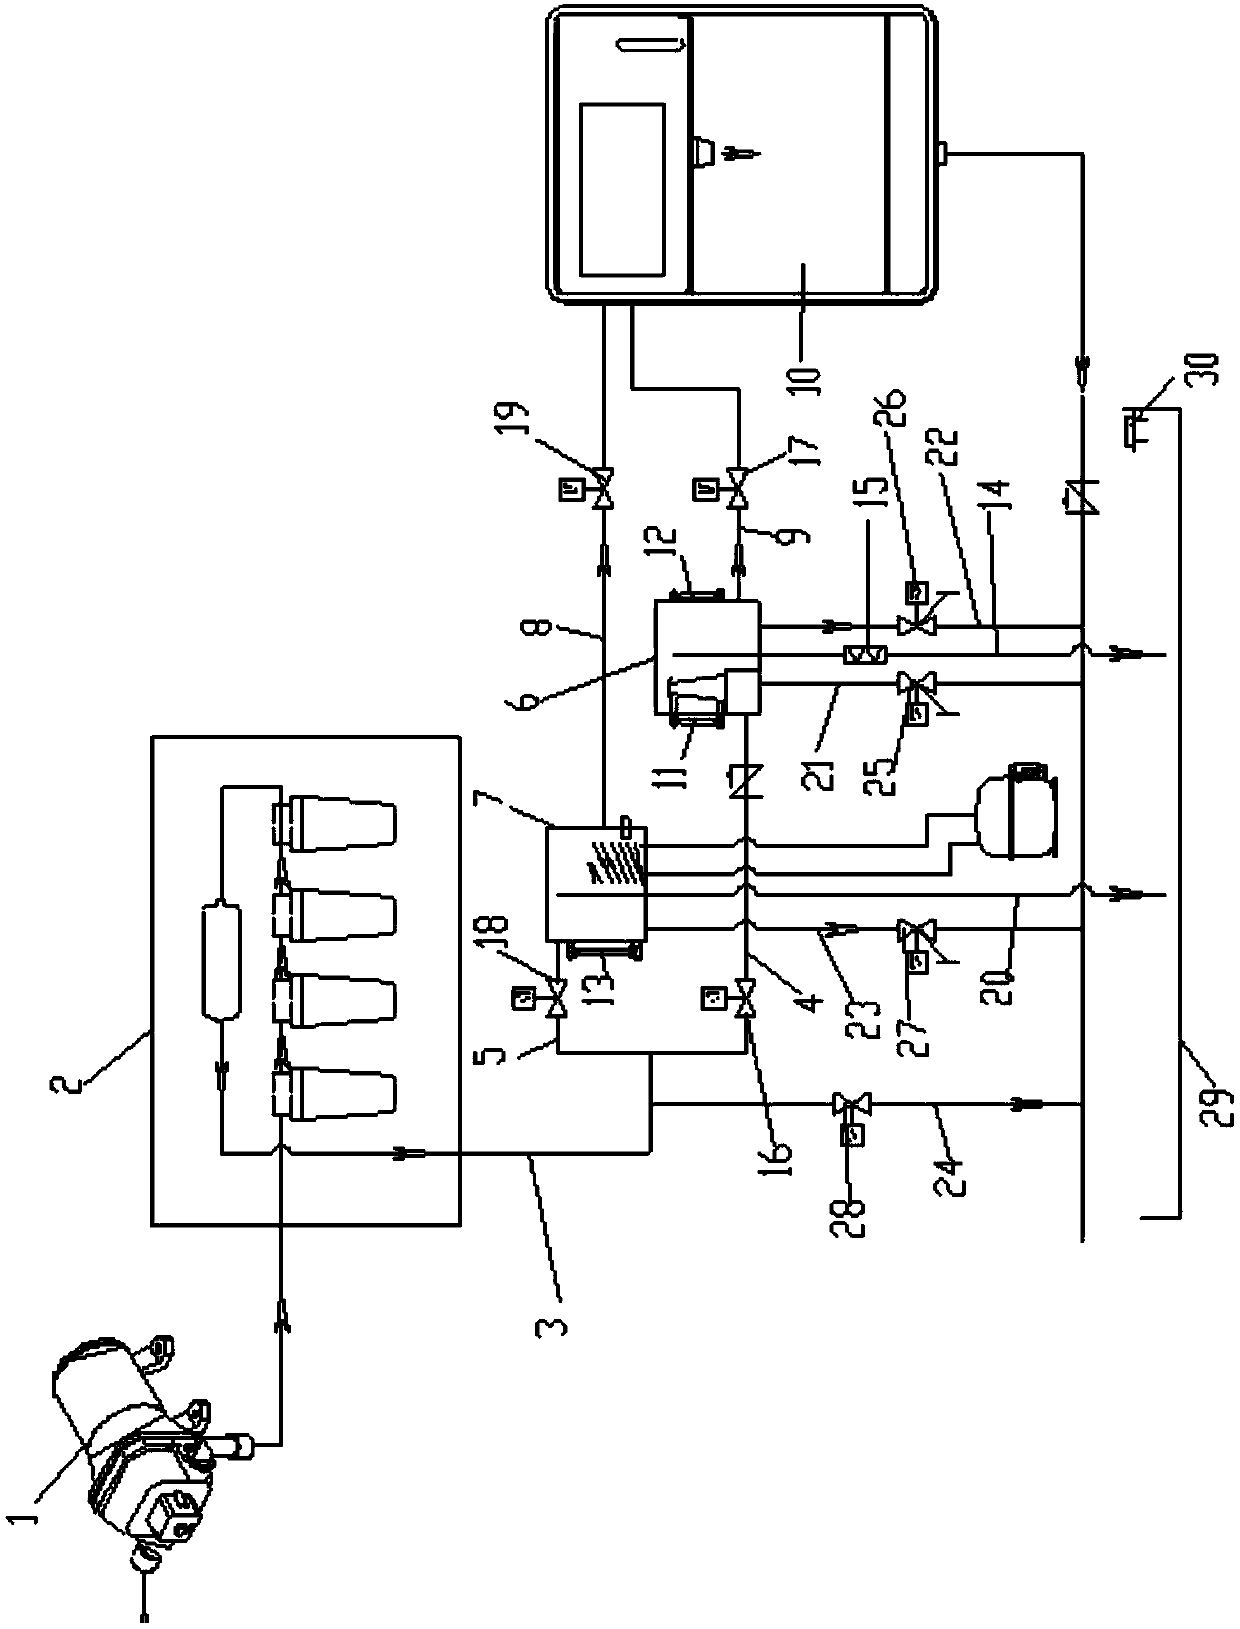 Control device and method for water dispenser